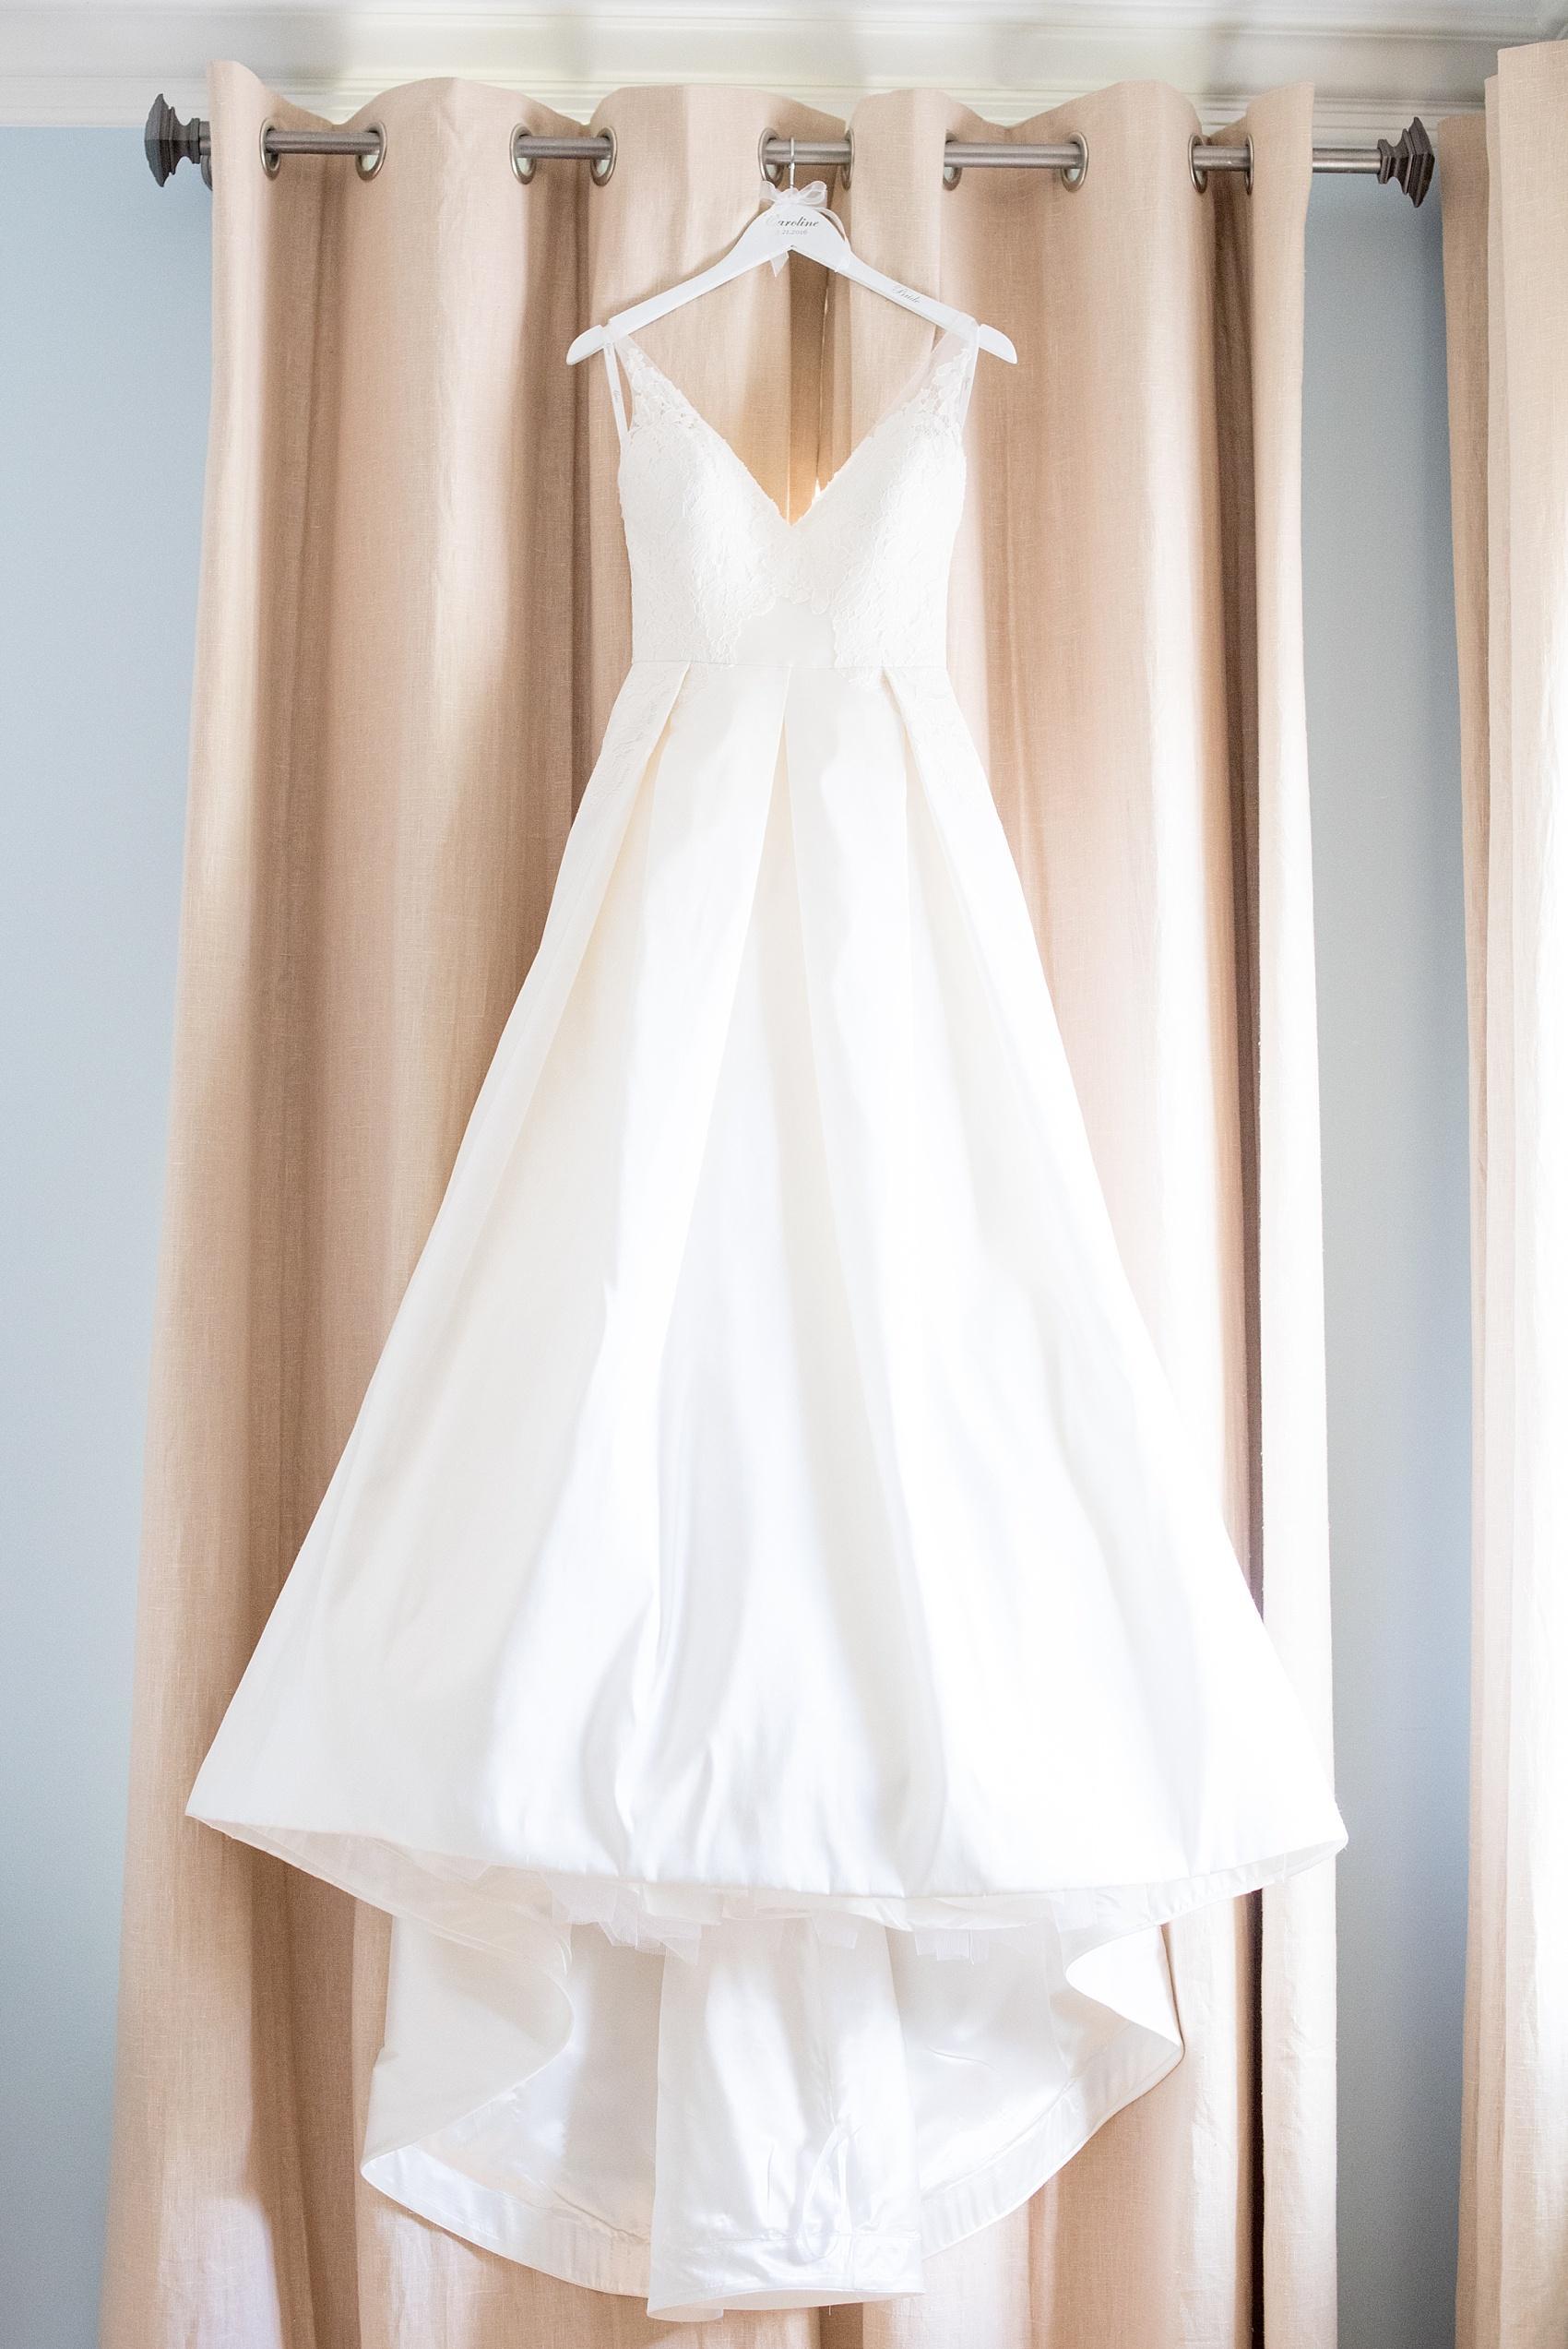 Mikkel Paige Photography pictures of a wedding in downtown Raleigh. Photo of the bridal gown on a custom hanger.